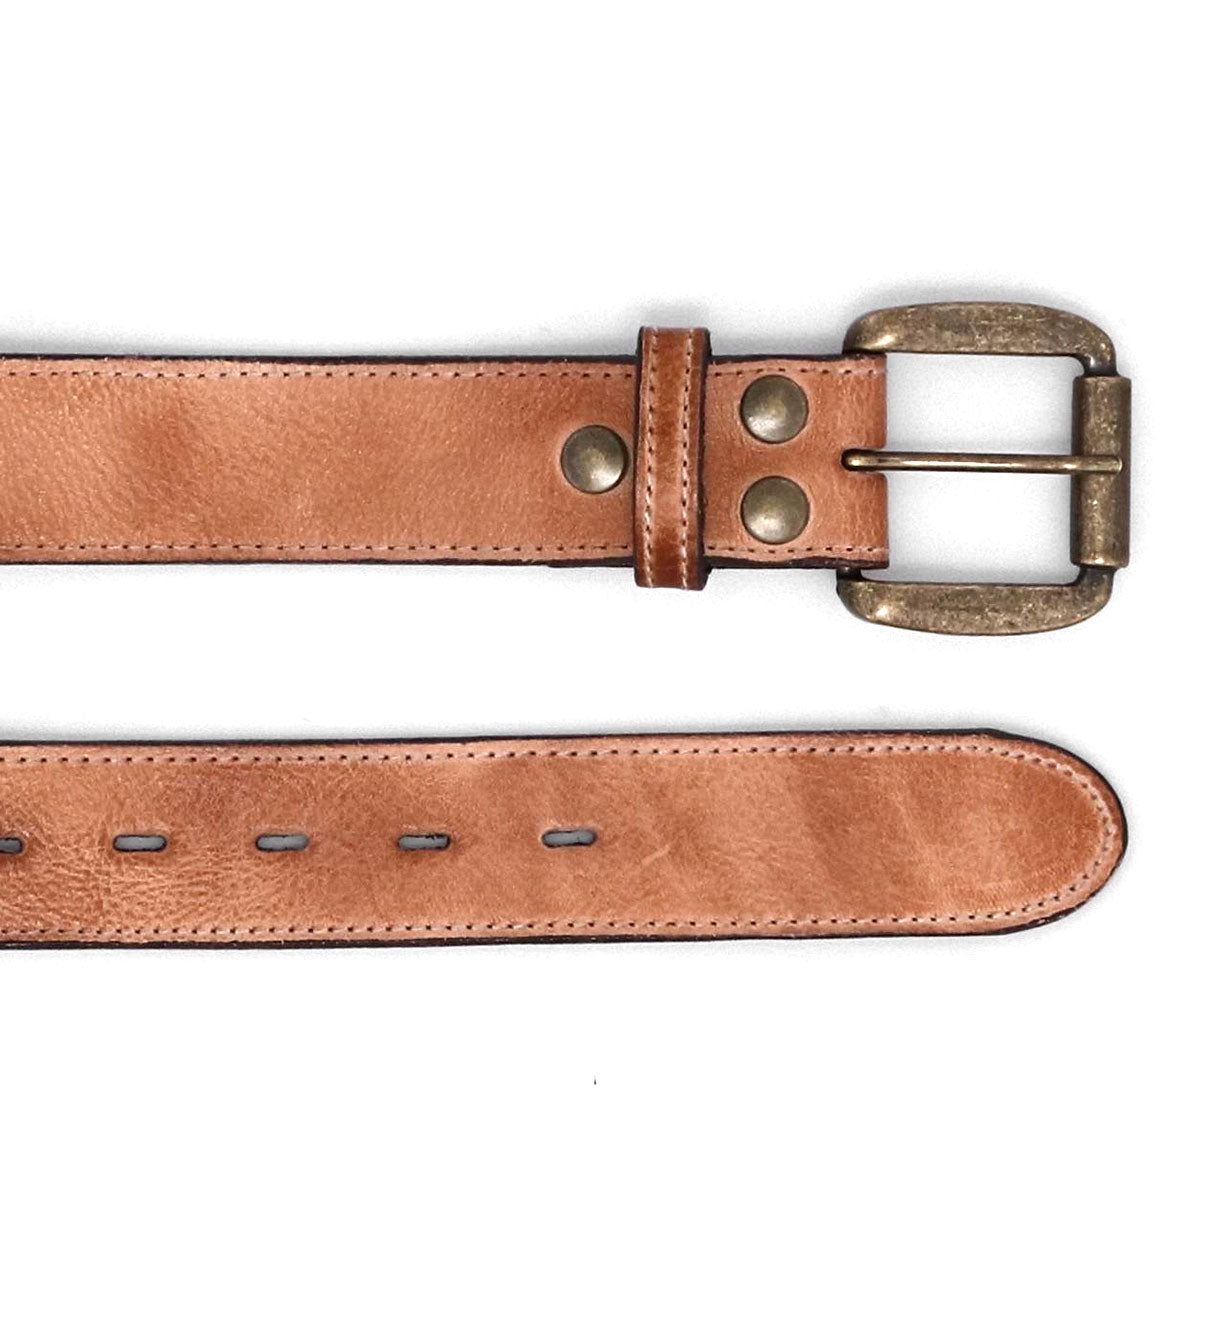 A Meander leather belt from Bed Stu on a white background.